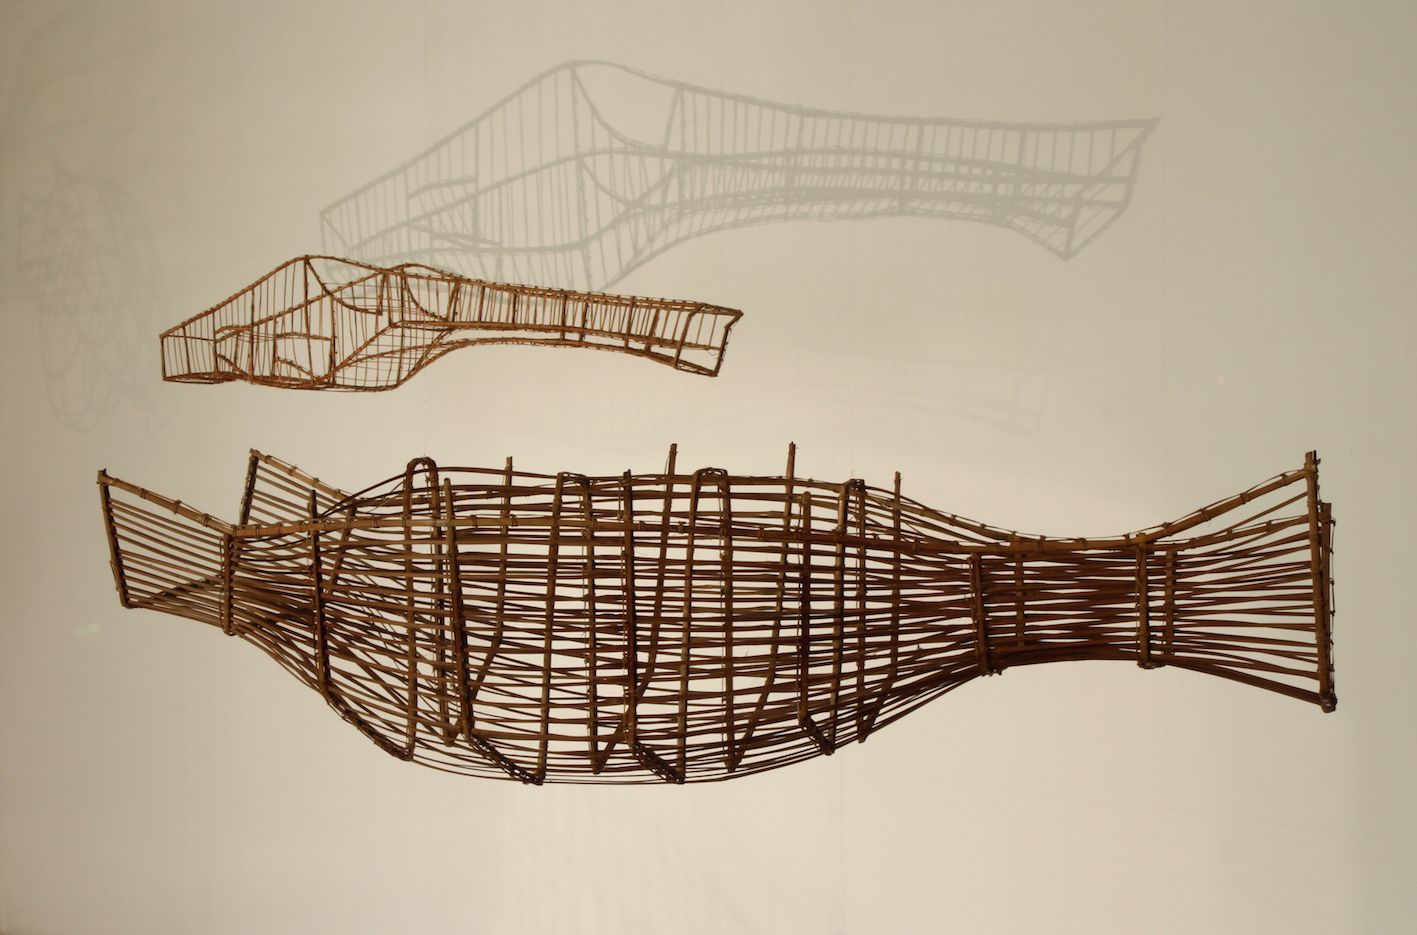 Spirits Under The Chi River_bamboo, steel wire and cathea loeseneri_(Tilapia_23x123x21cm), (Shark catfish_23.5x183x22.5cm)_20